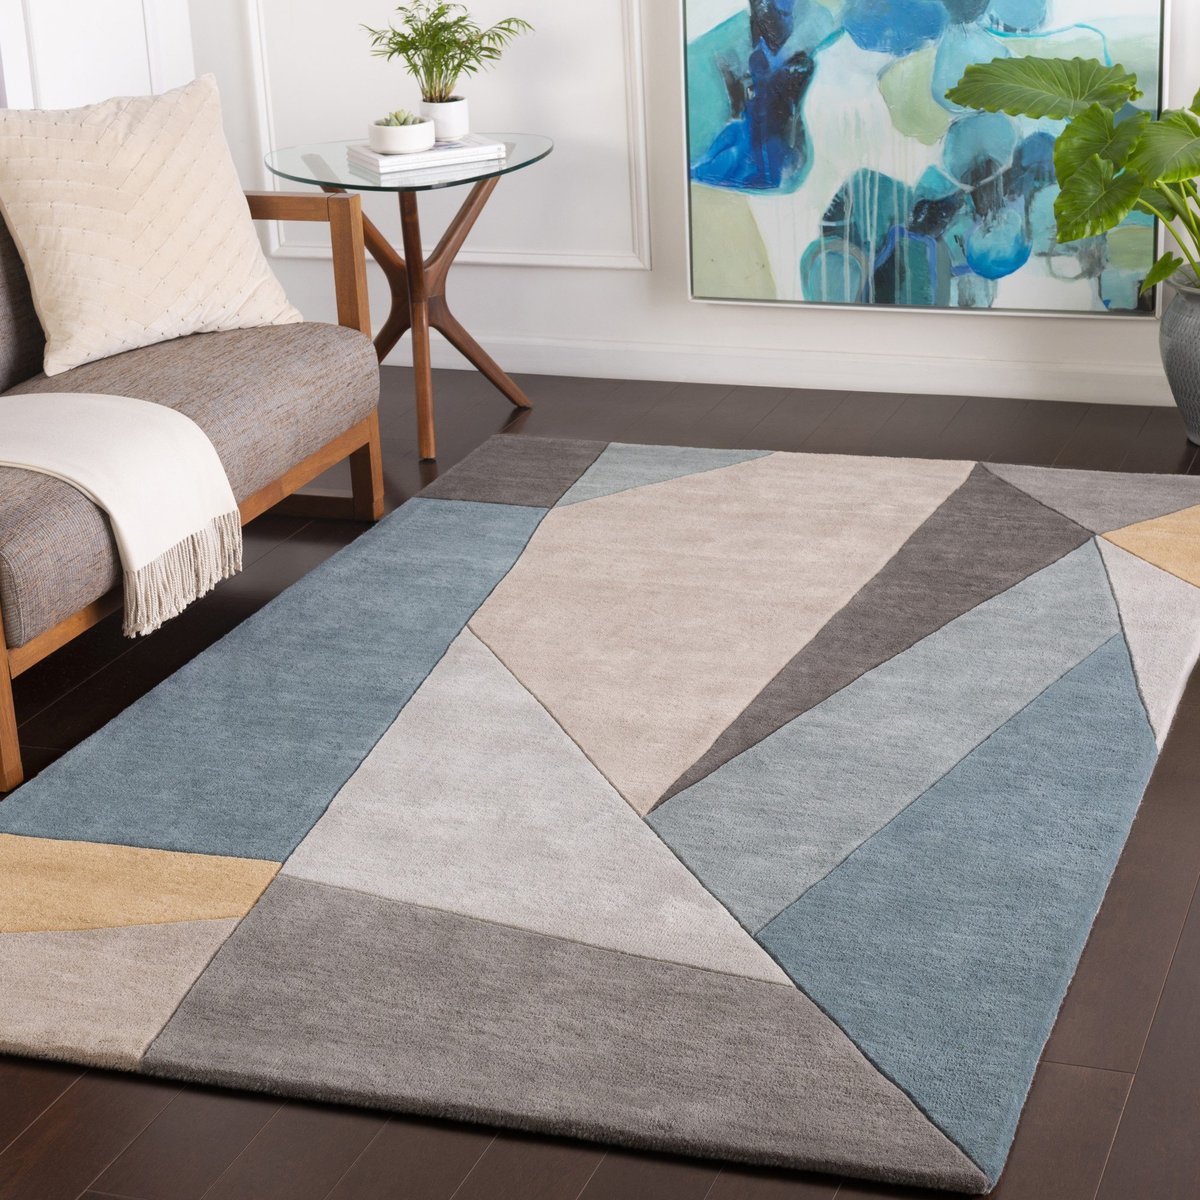 Aqua Blue Rugs with Grey Modern Abstract Rugs for Bedroom Affordable Rug ONLINE 